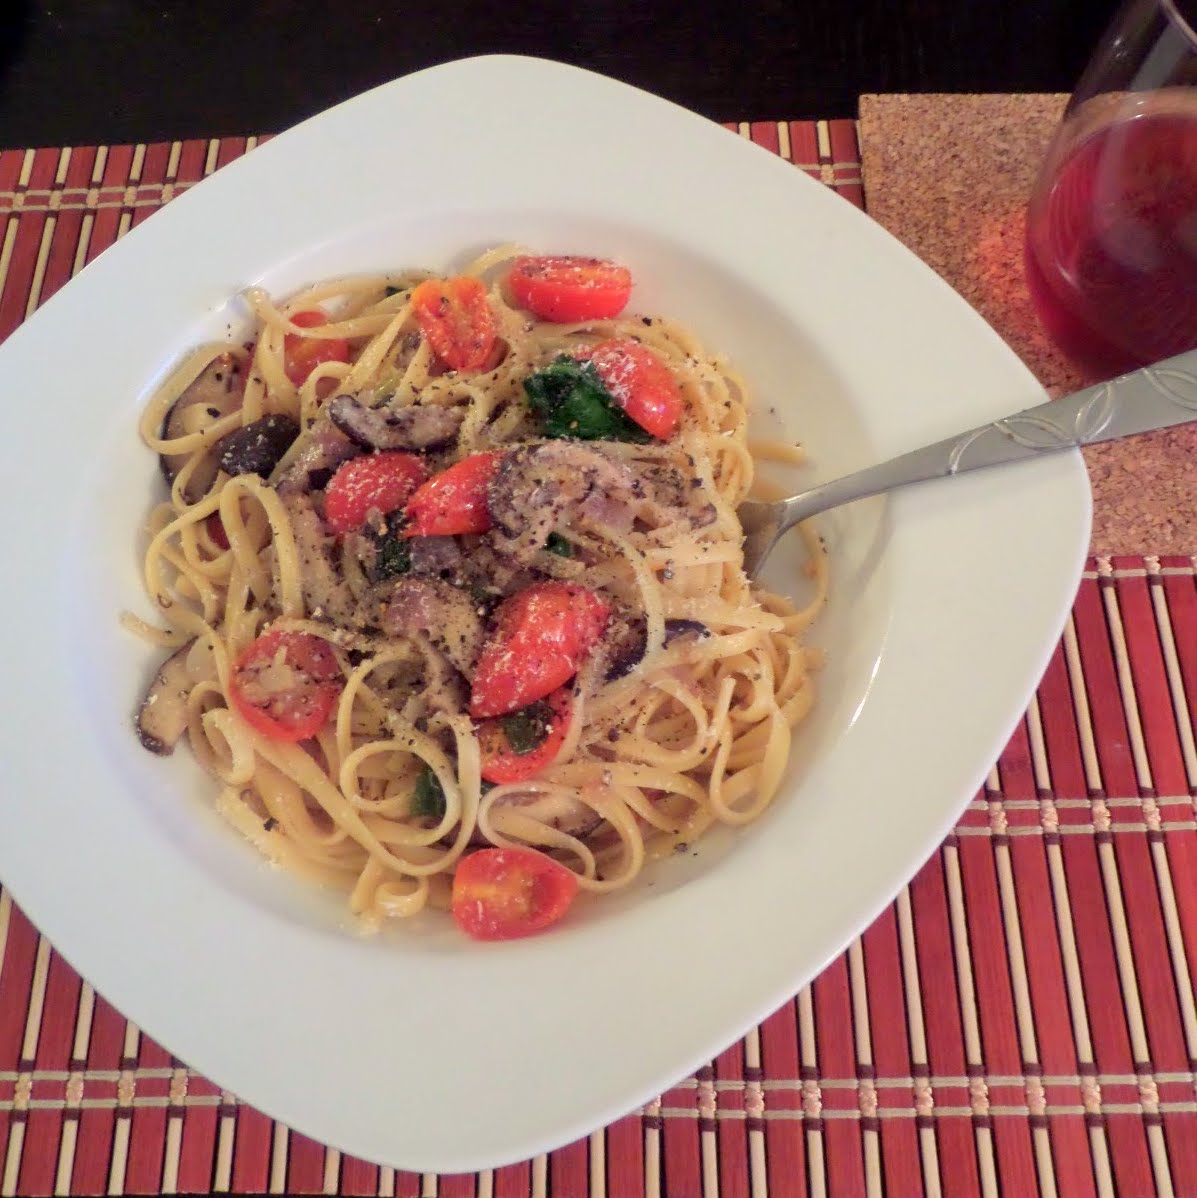 Mushroom Spinach Tomato Pasta:  Linguine noodles in a light white wine and garlic sauce tossed with mushrooms, spinach and grape tomatoes.